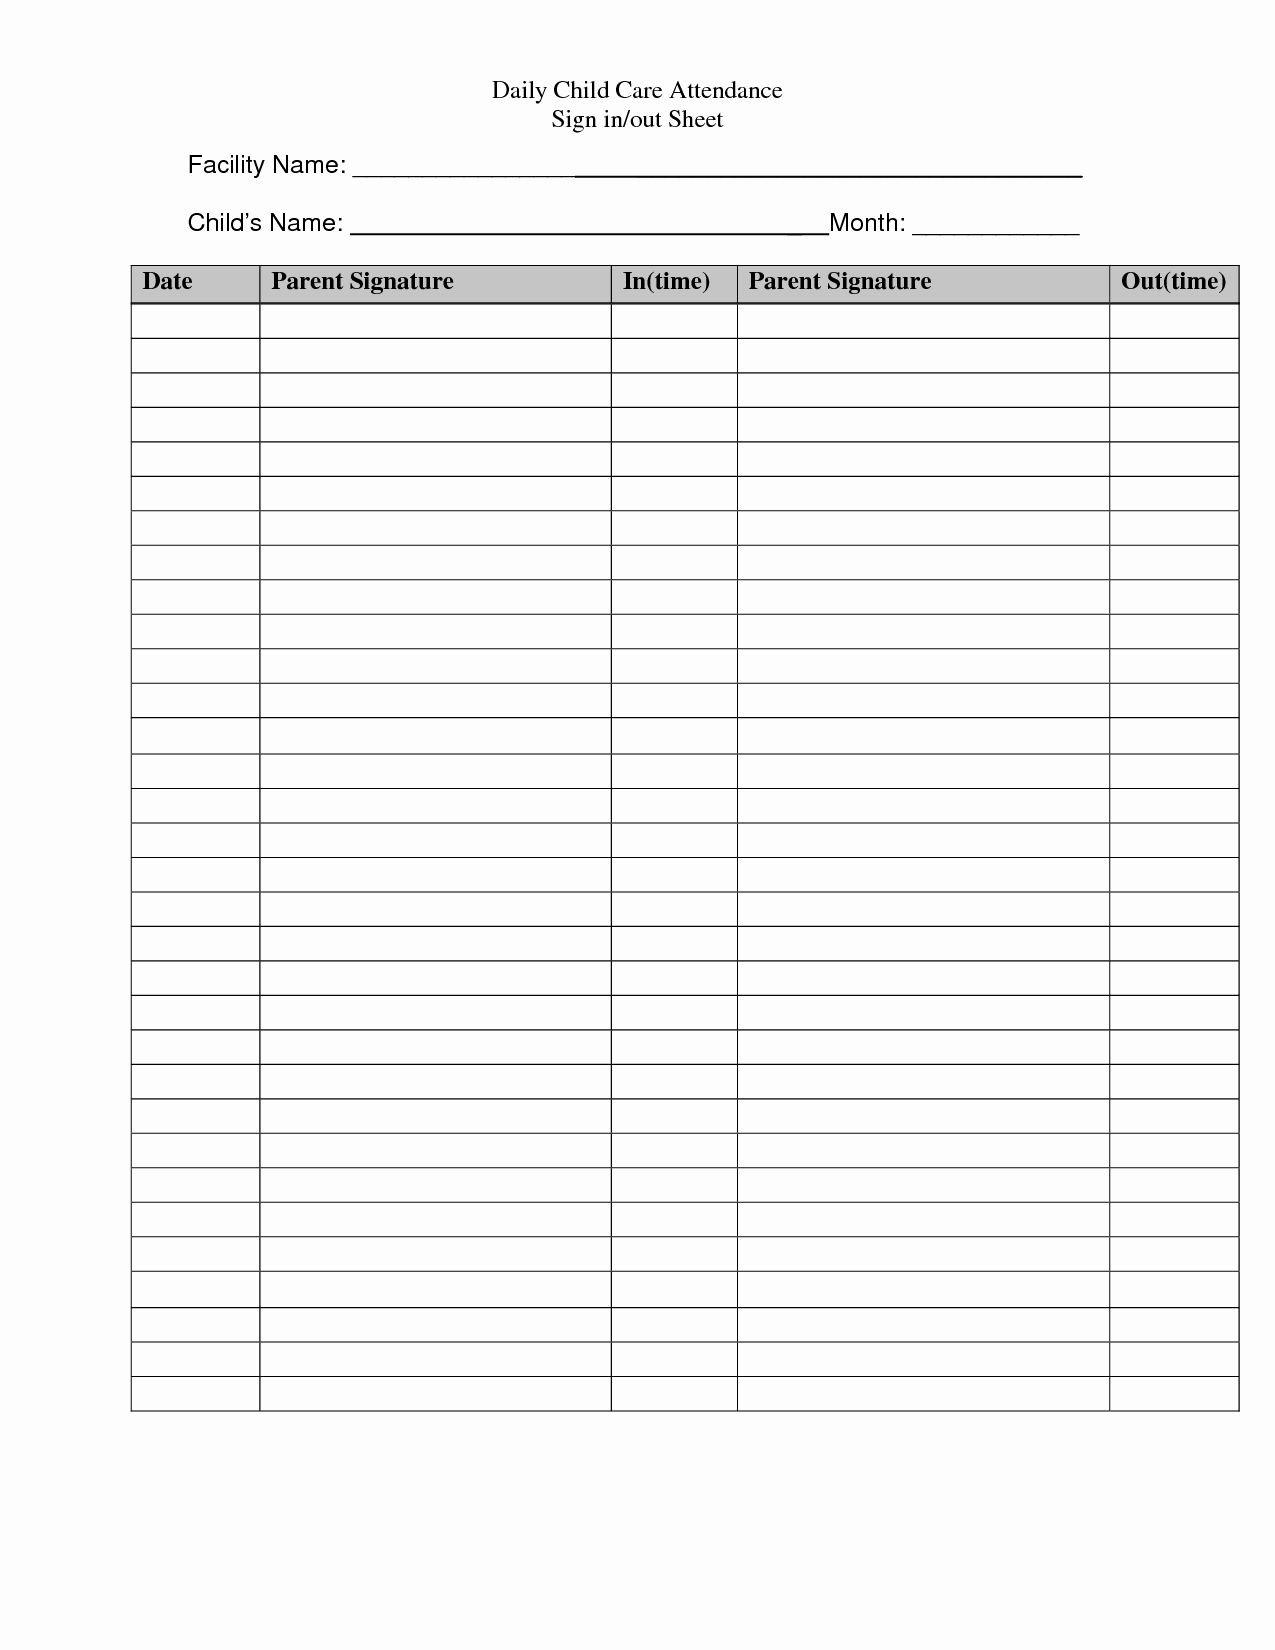 Daily Sign In Sheet for Daycare Luxury 1000 Ideas About Daycare Daily Sheets Pinterest Infant